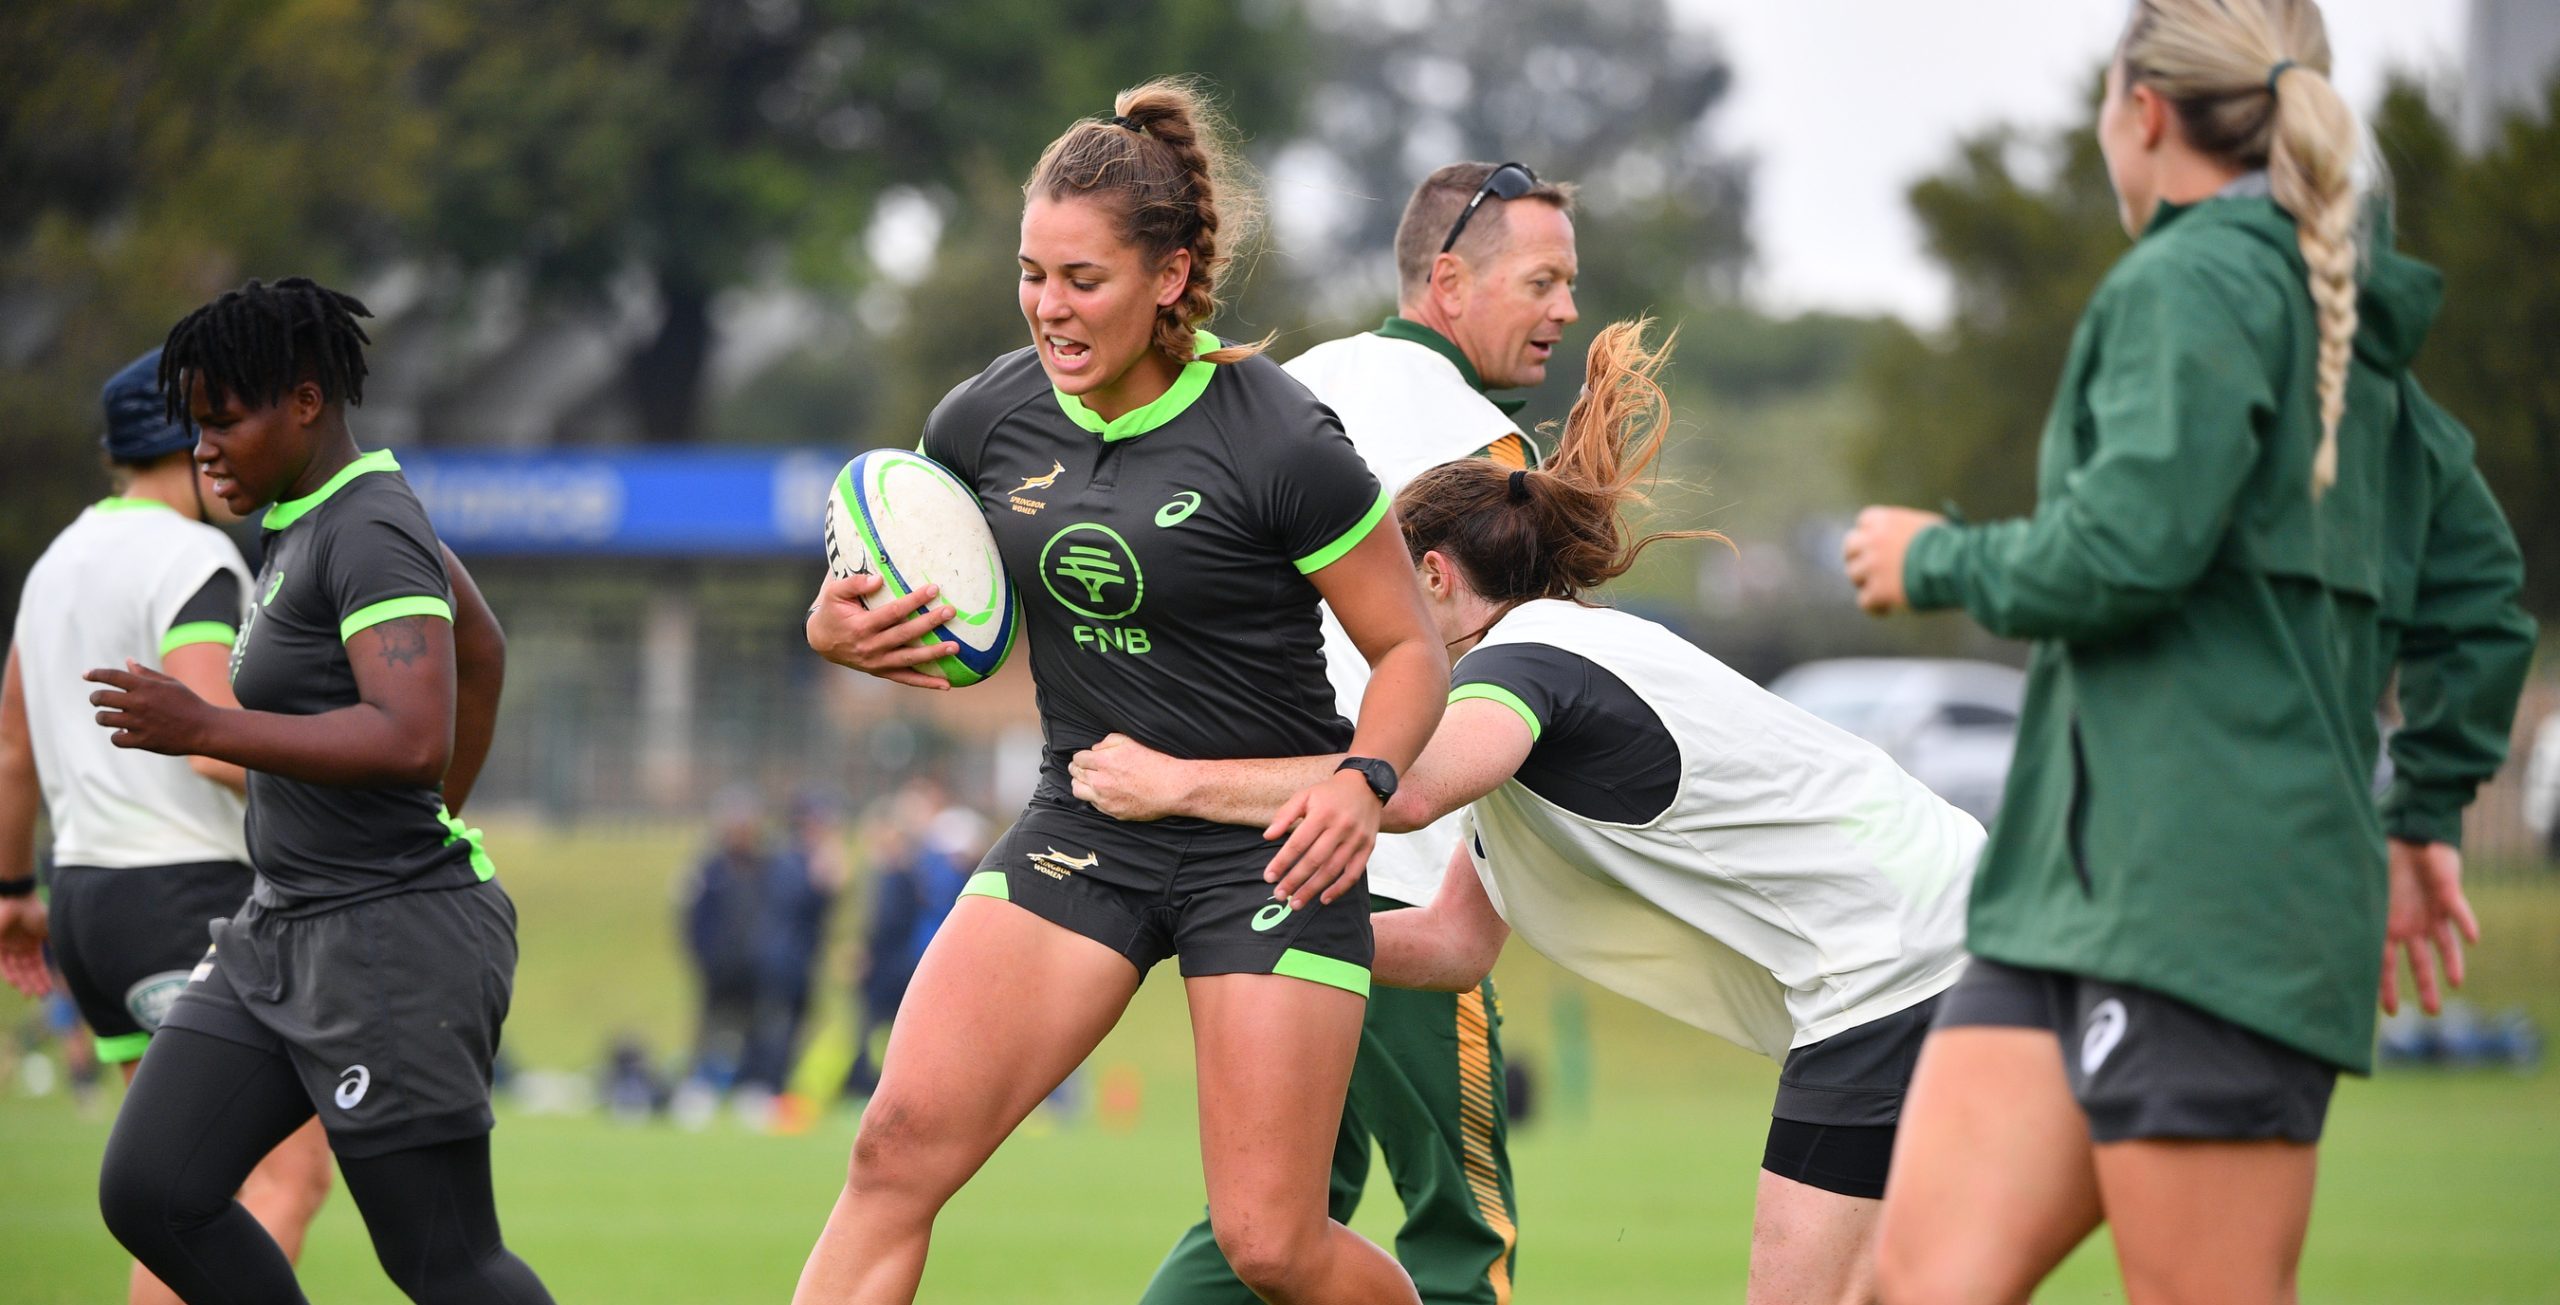 Growth spurt continues for Springbok Women